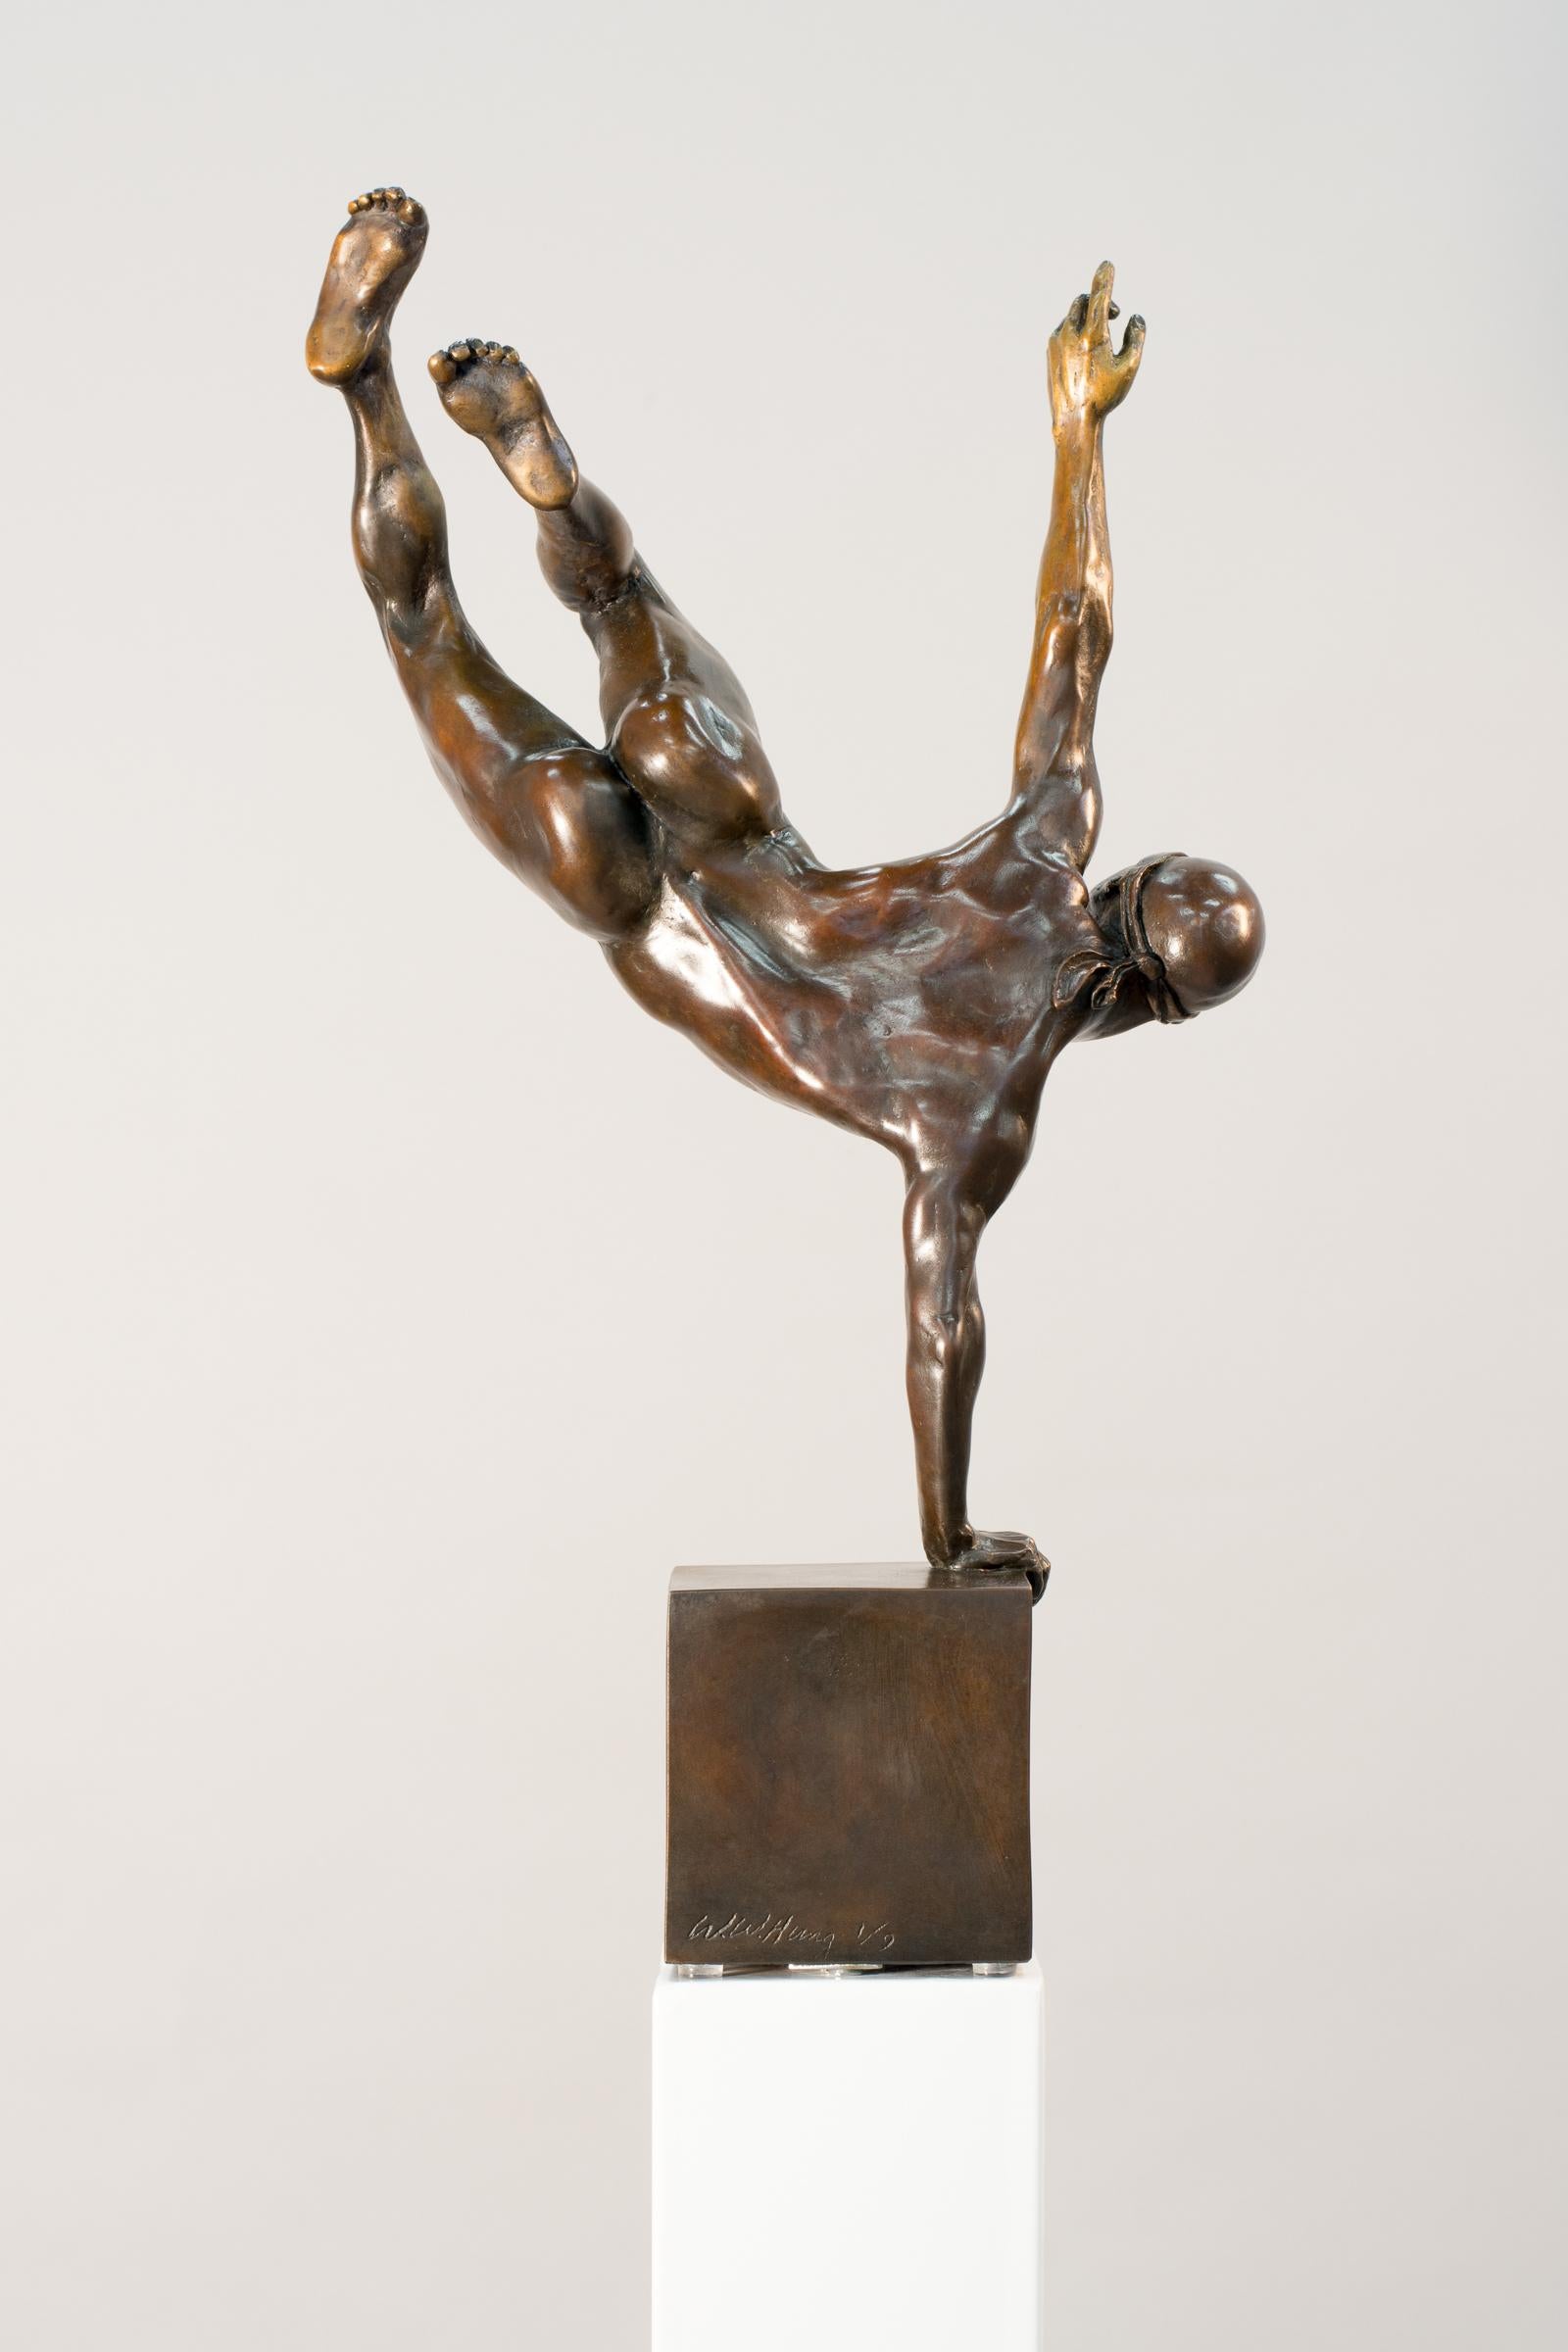 Yearning 1/9 - male, nude, figurative, statuette, bronze sculpture - Sculpture by W.W. Hung